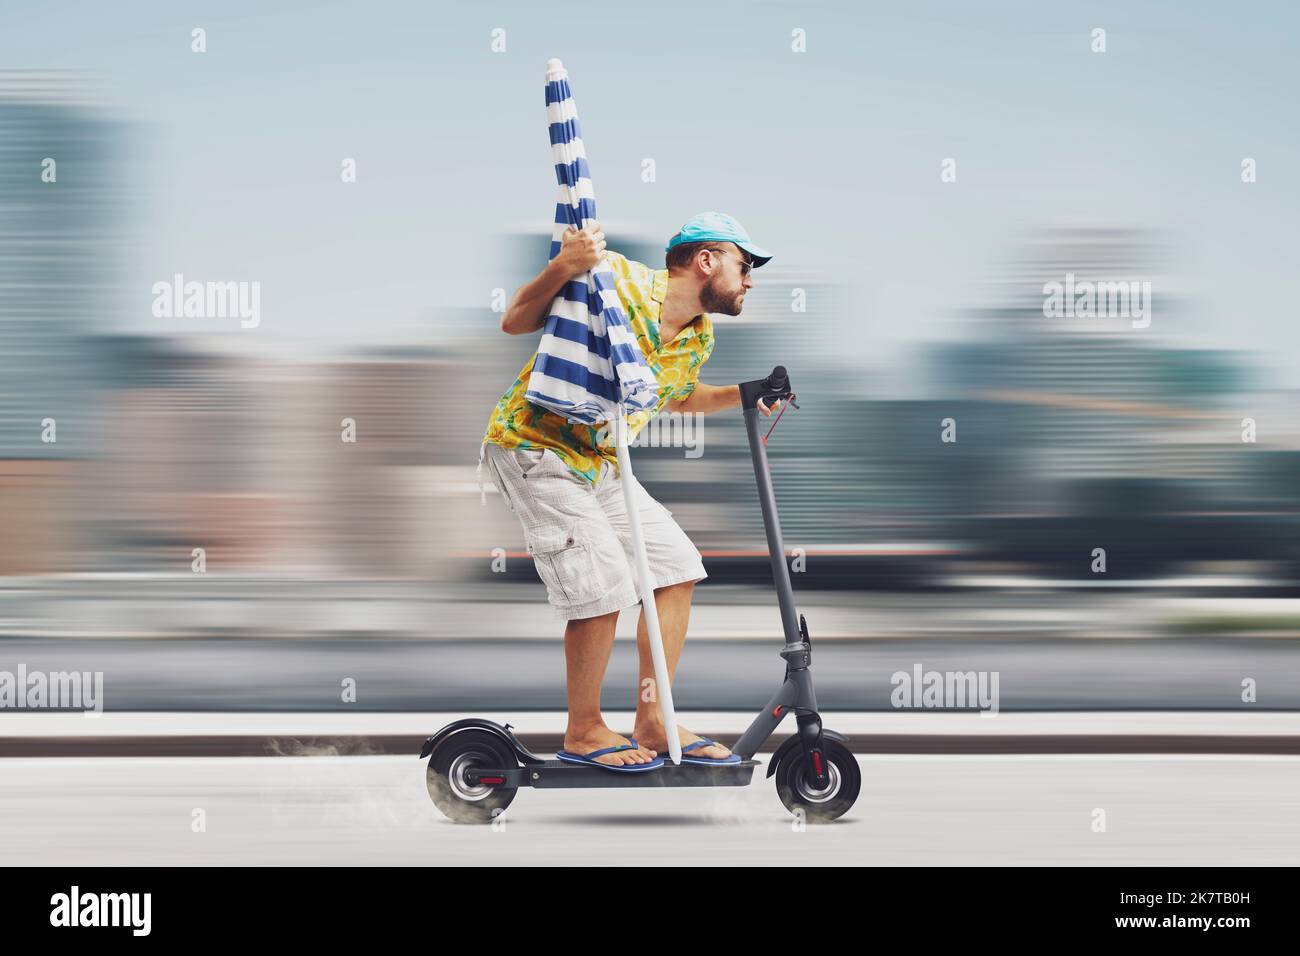 Man riding an electric scooter and holding a beach umbrella, he is going to the beach Stock Photo